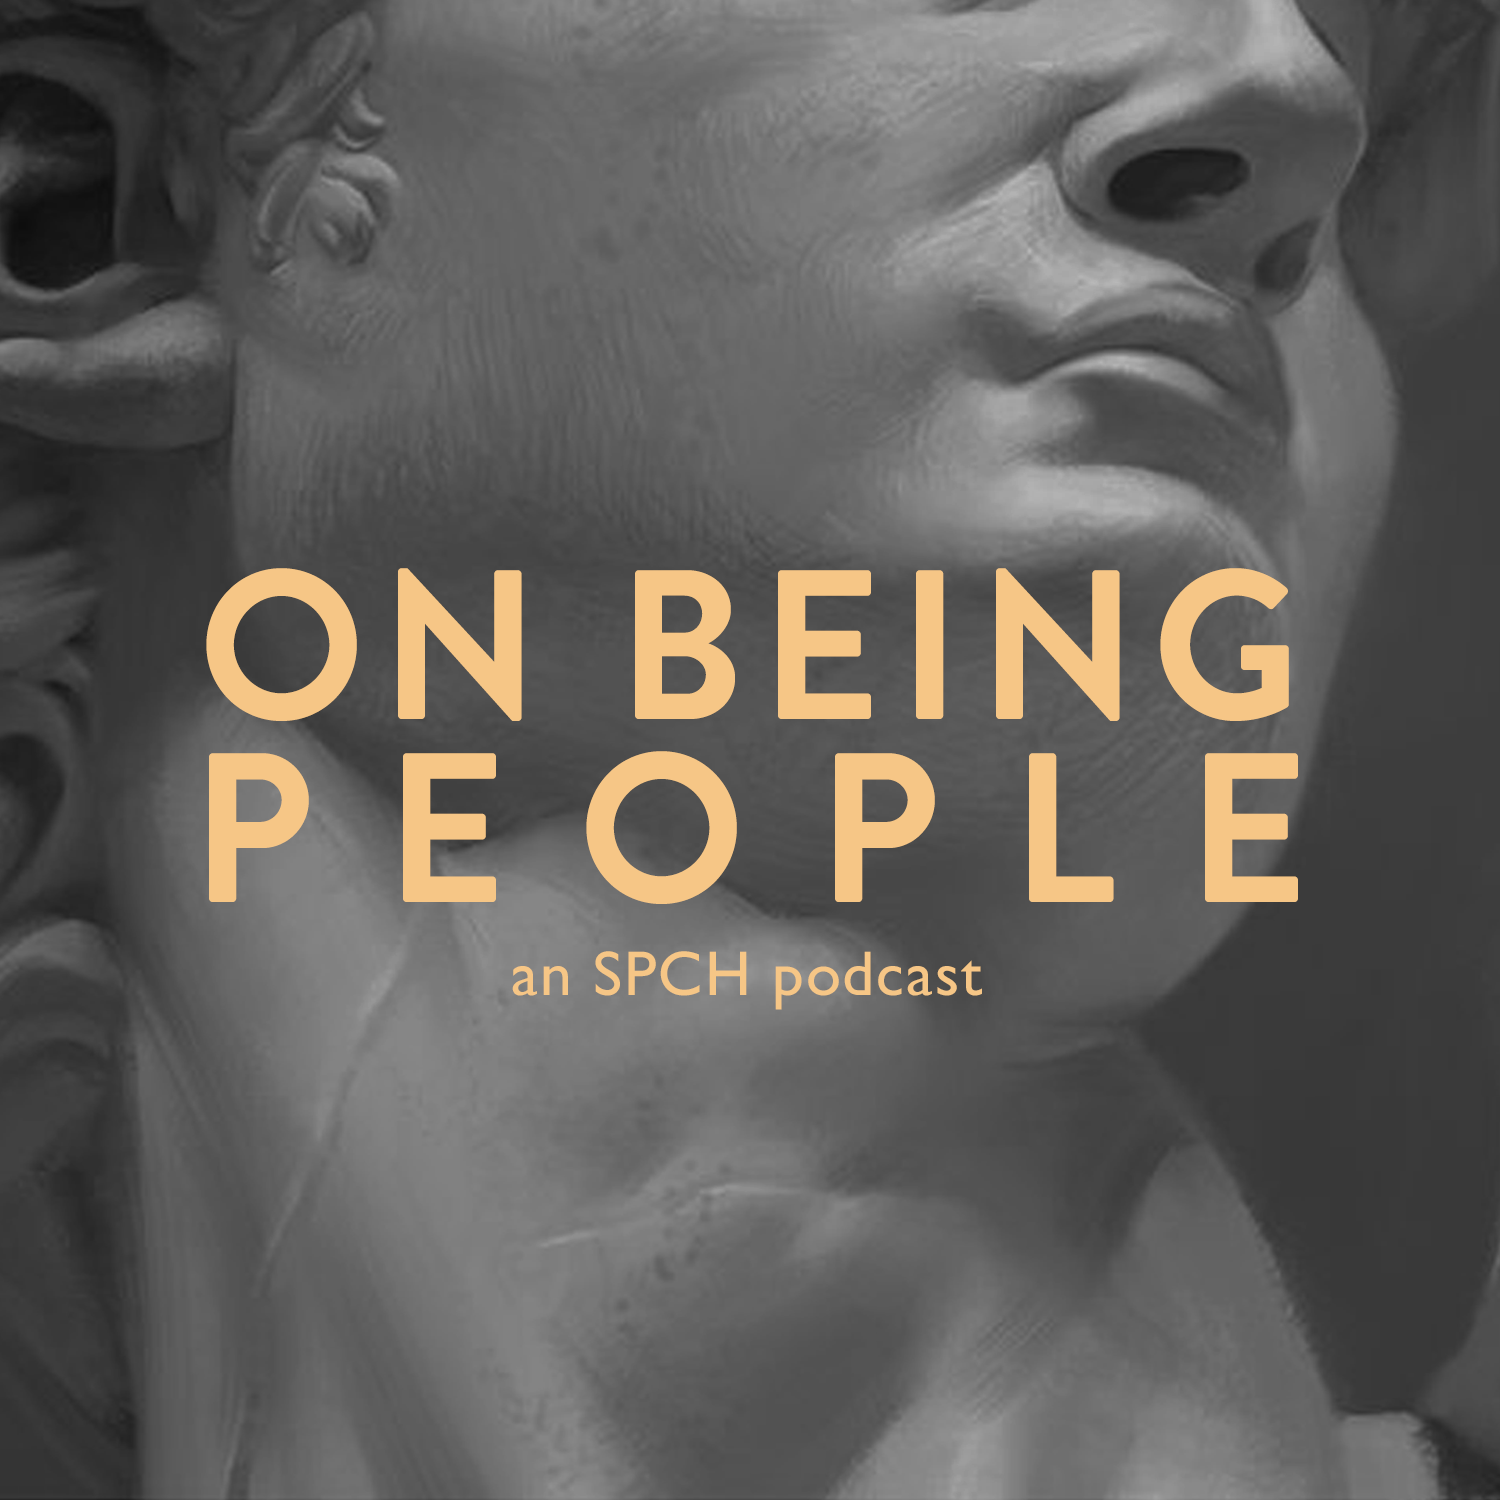 On Being People